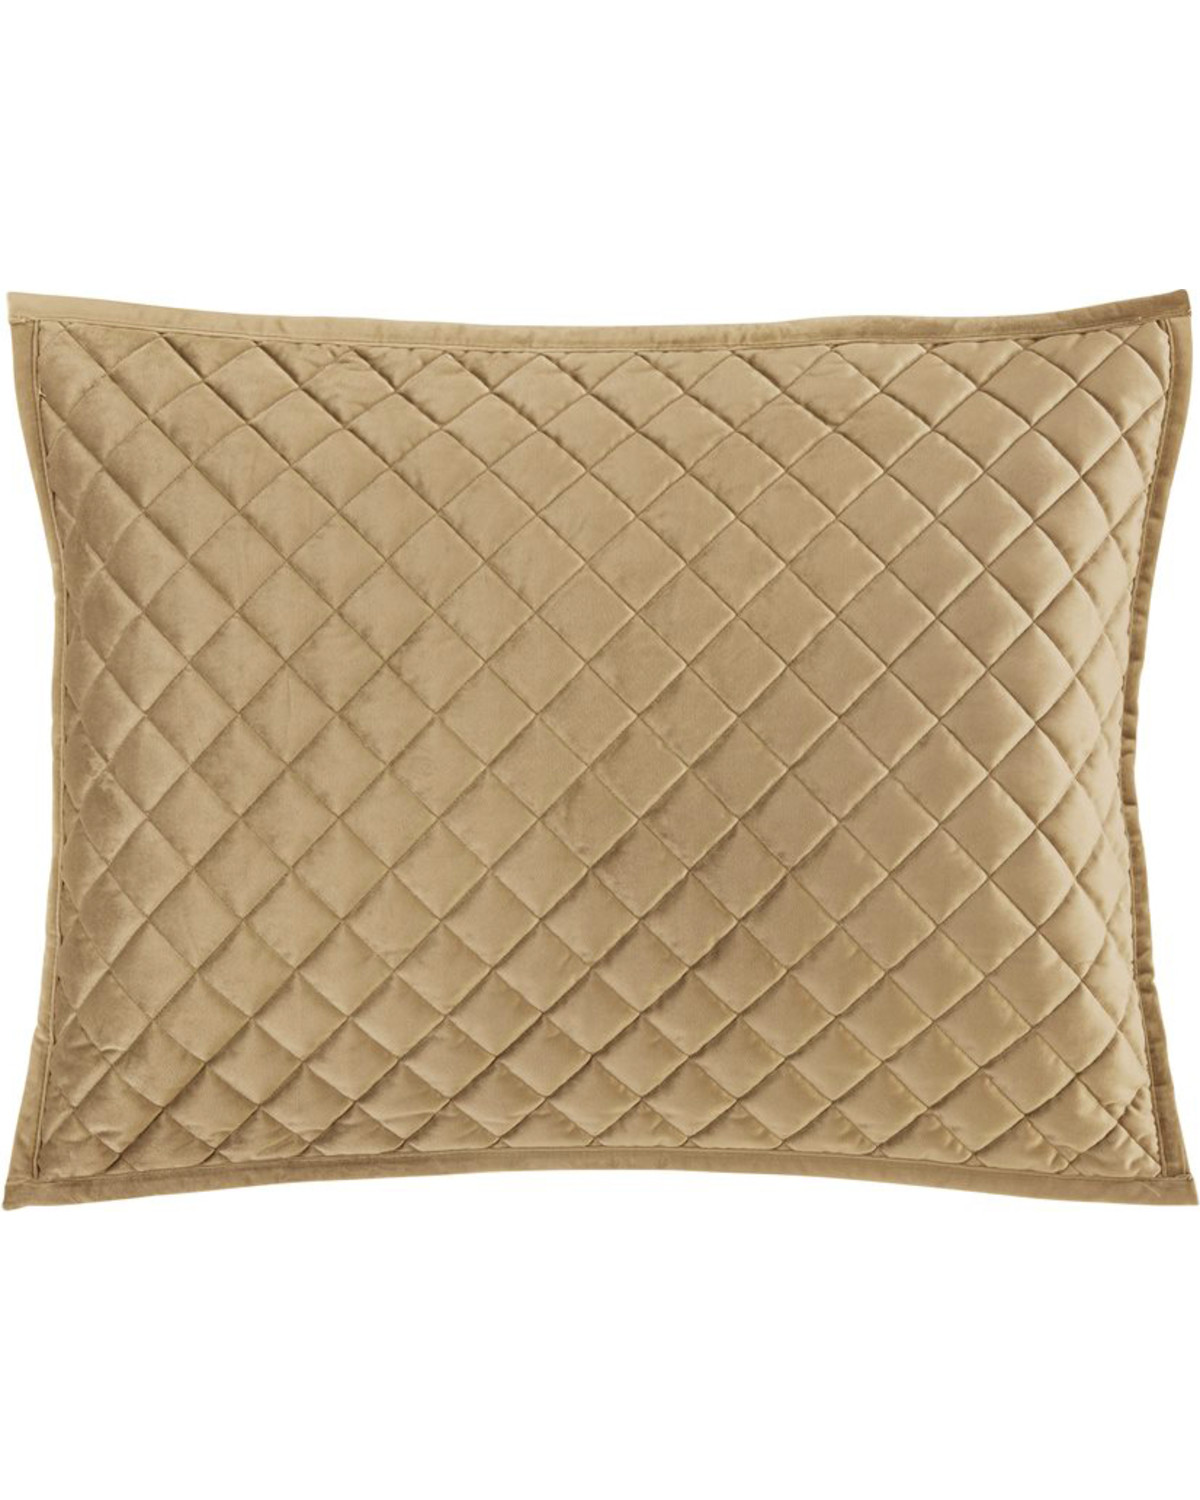 HiEnd Accents King Oatmeal Diamond Quilted Shams